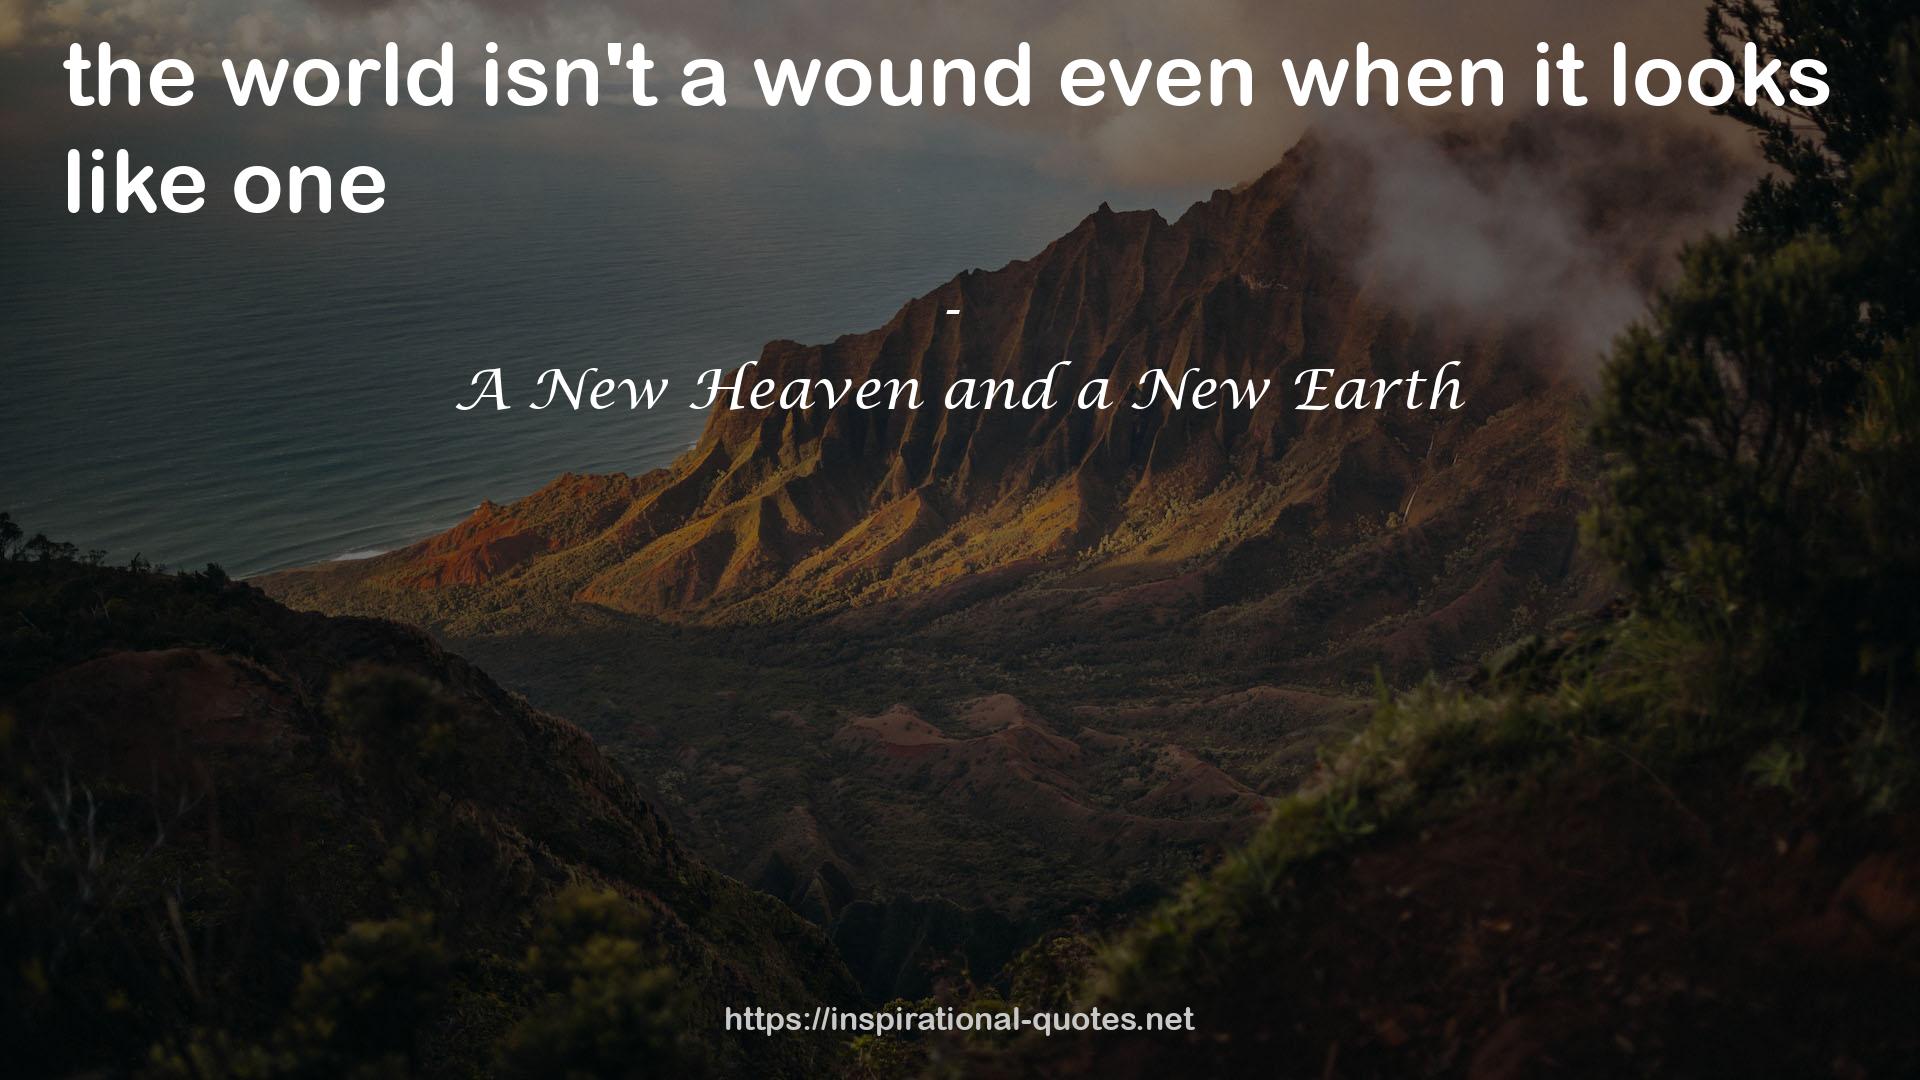 A New Heaven and a New Earth QUOTES